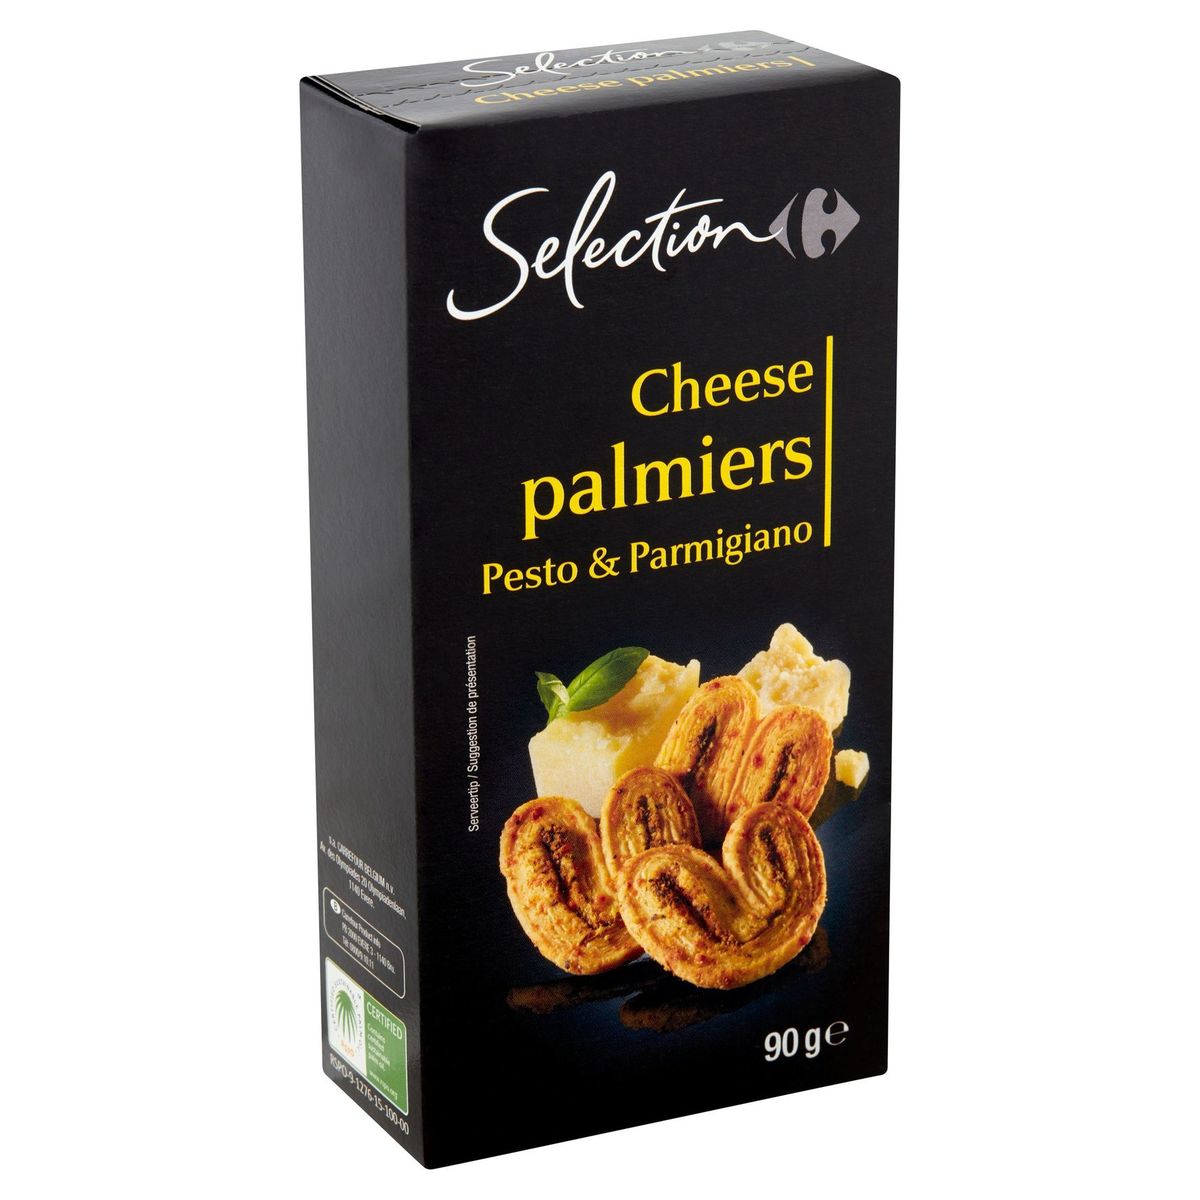 Carrefour Selection Cheese Palmiers Pesto & Parmigiano 90 g